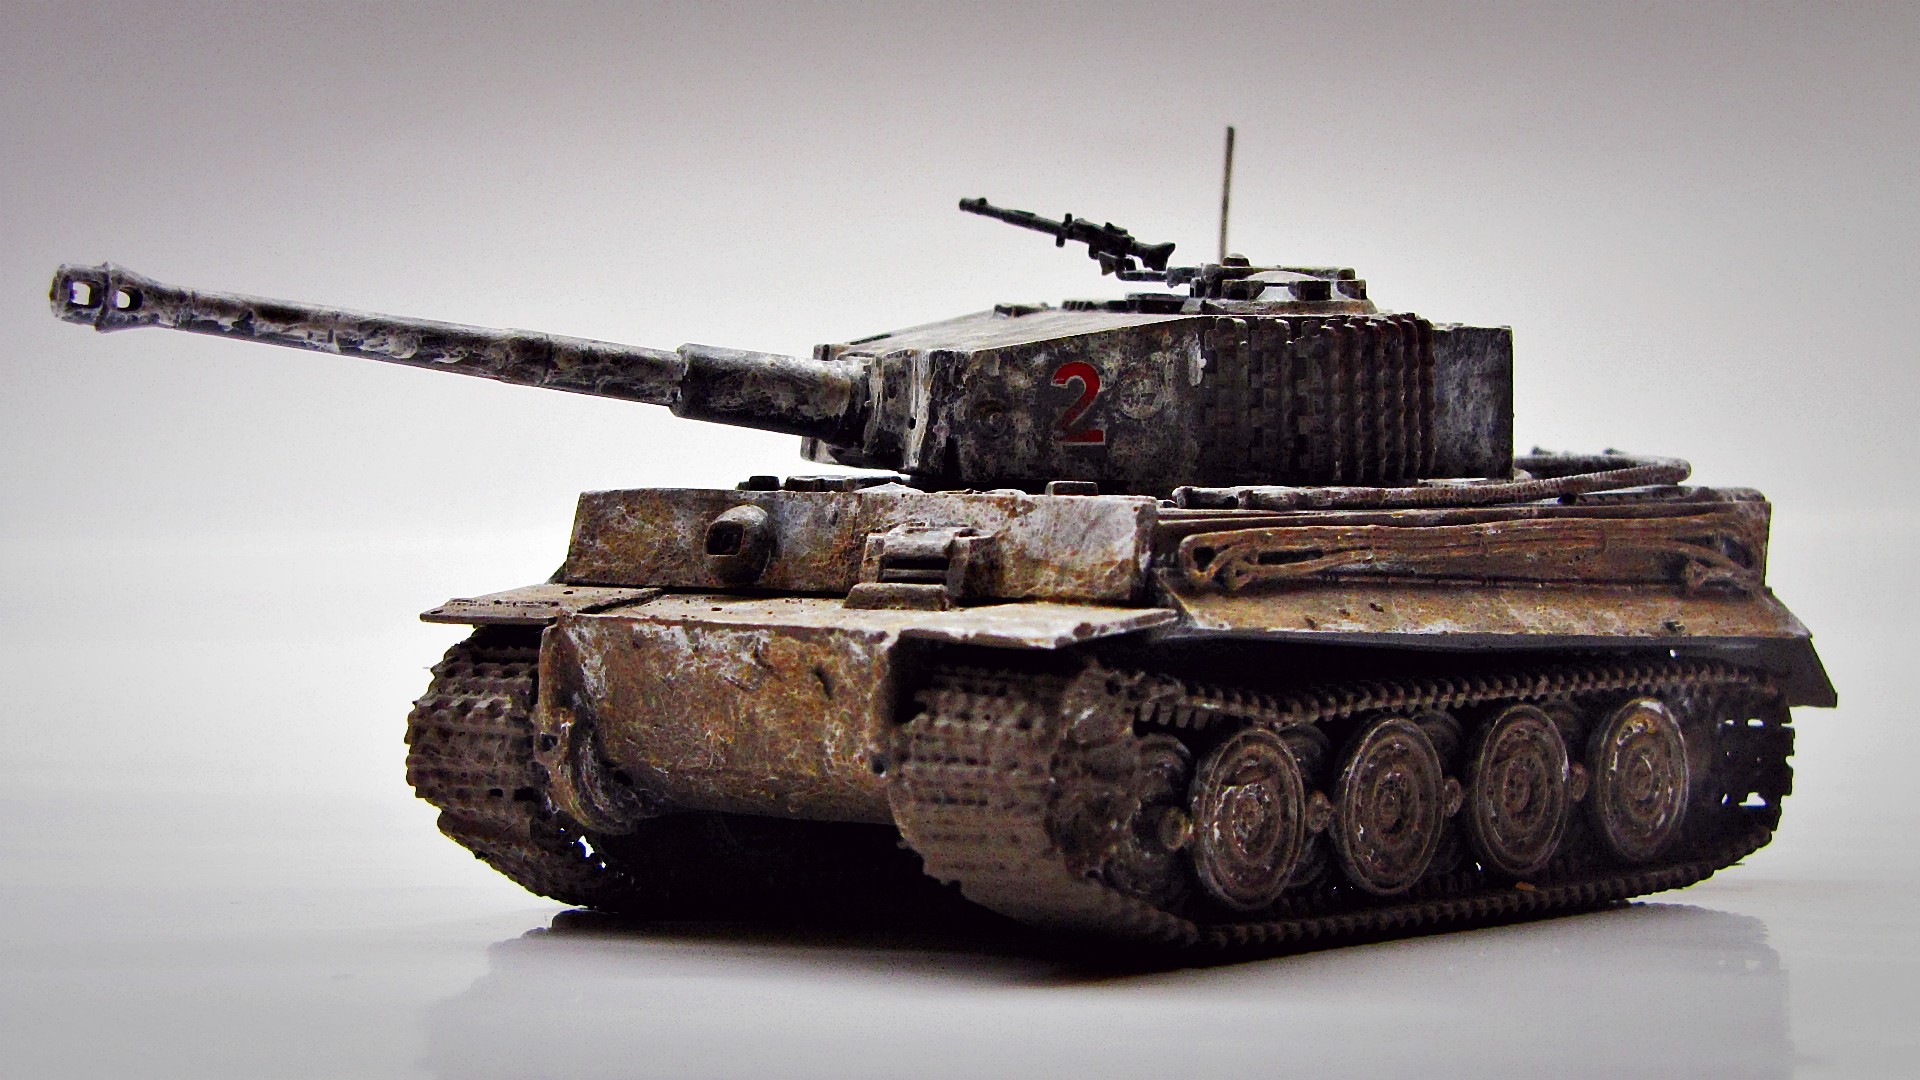 guns, army, military, old, weapons, tanks, vehicles, rusted, Panzer ...